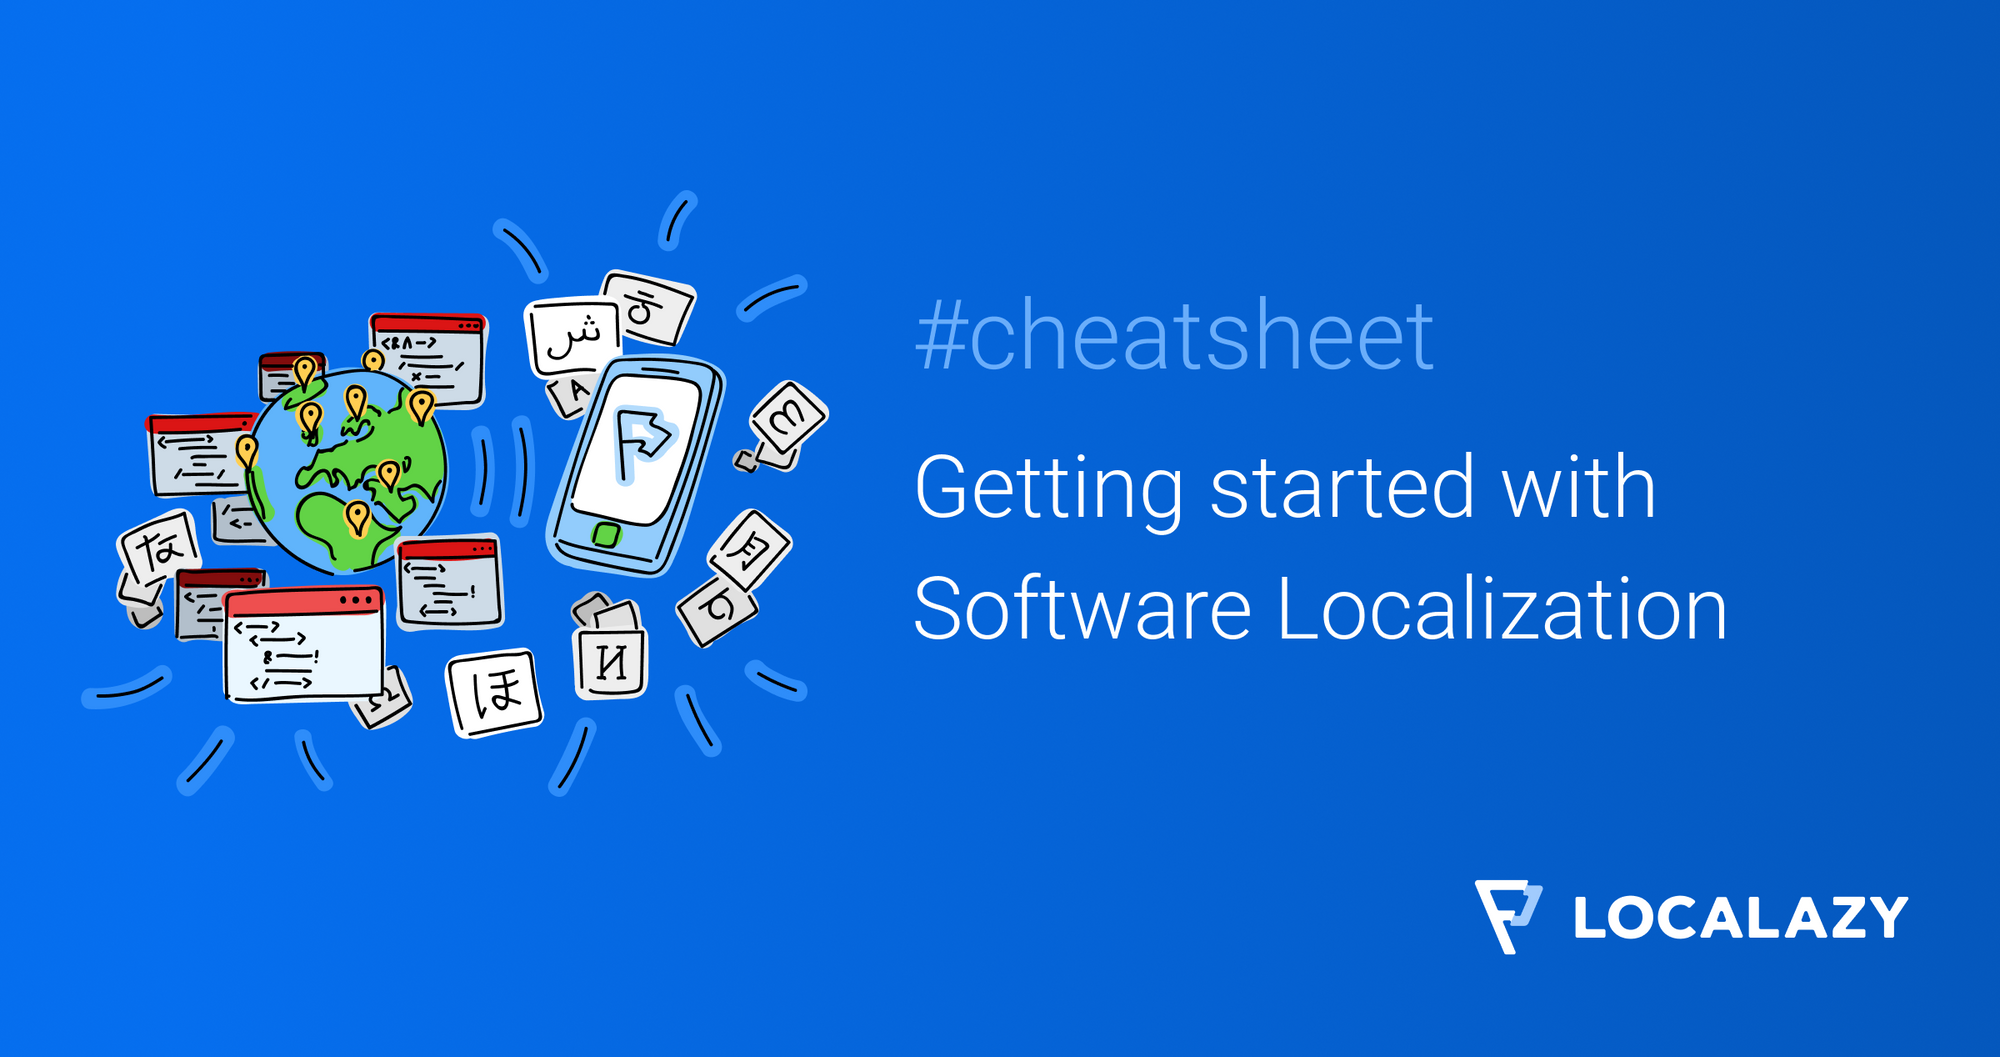 Cheatsheet: Getting started with Software Localization